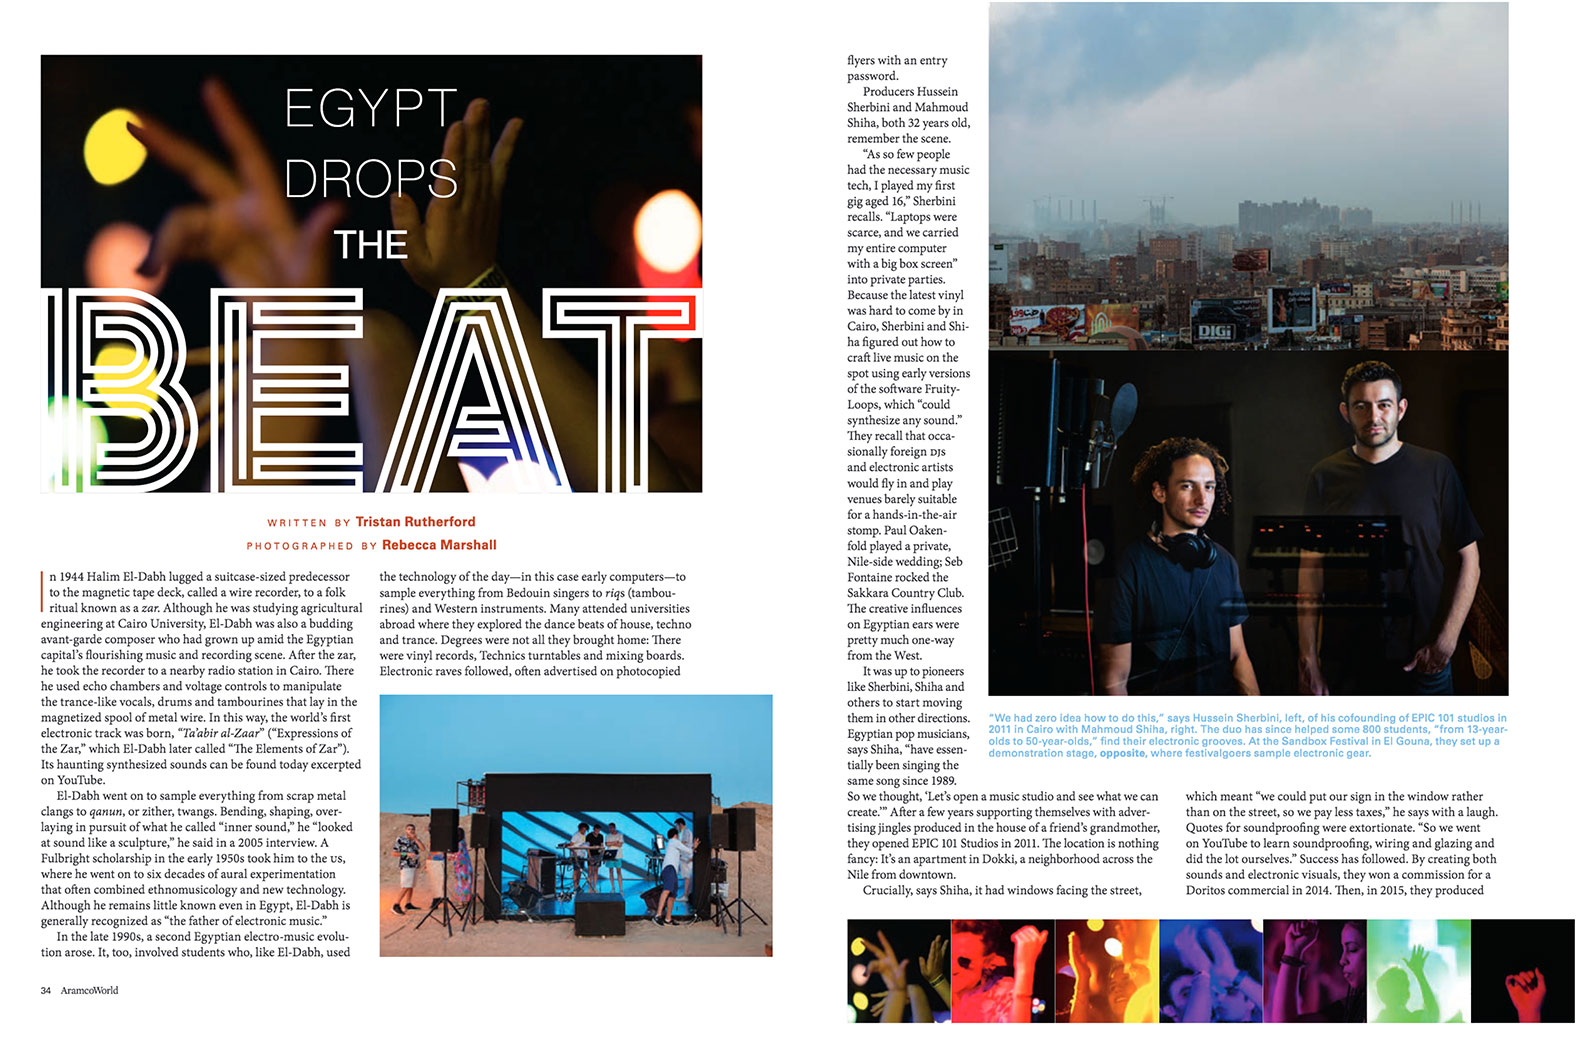 Double-page magazine spread showing text and several photographs, a portait, cityscape and dance festival photographs in Egypt